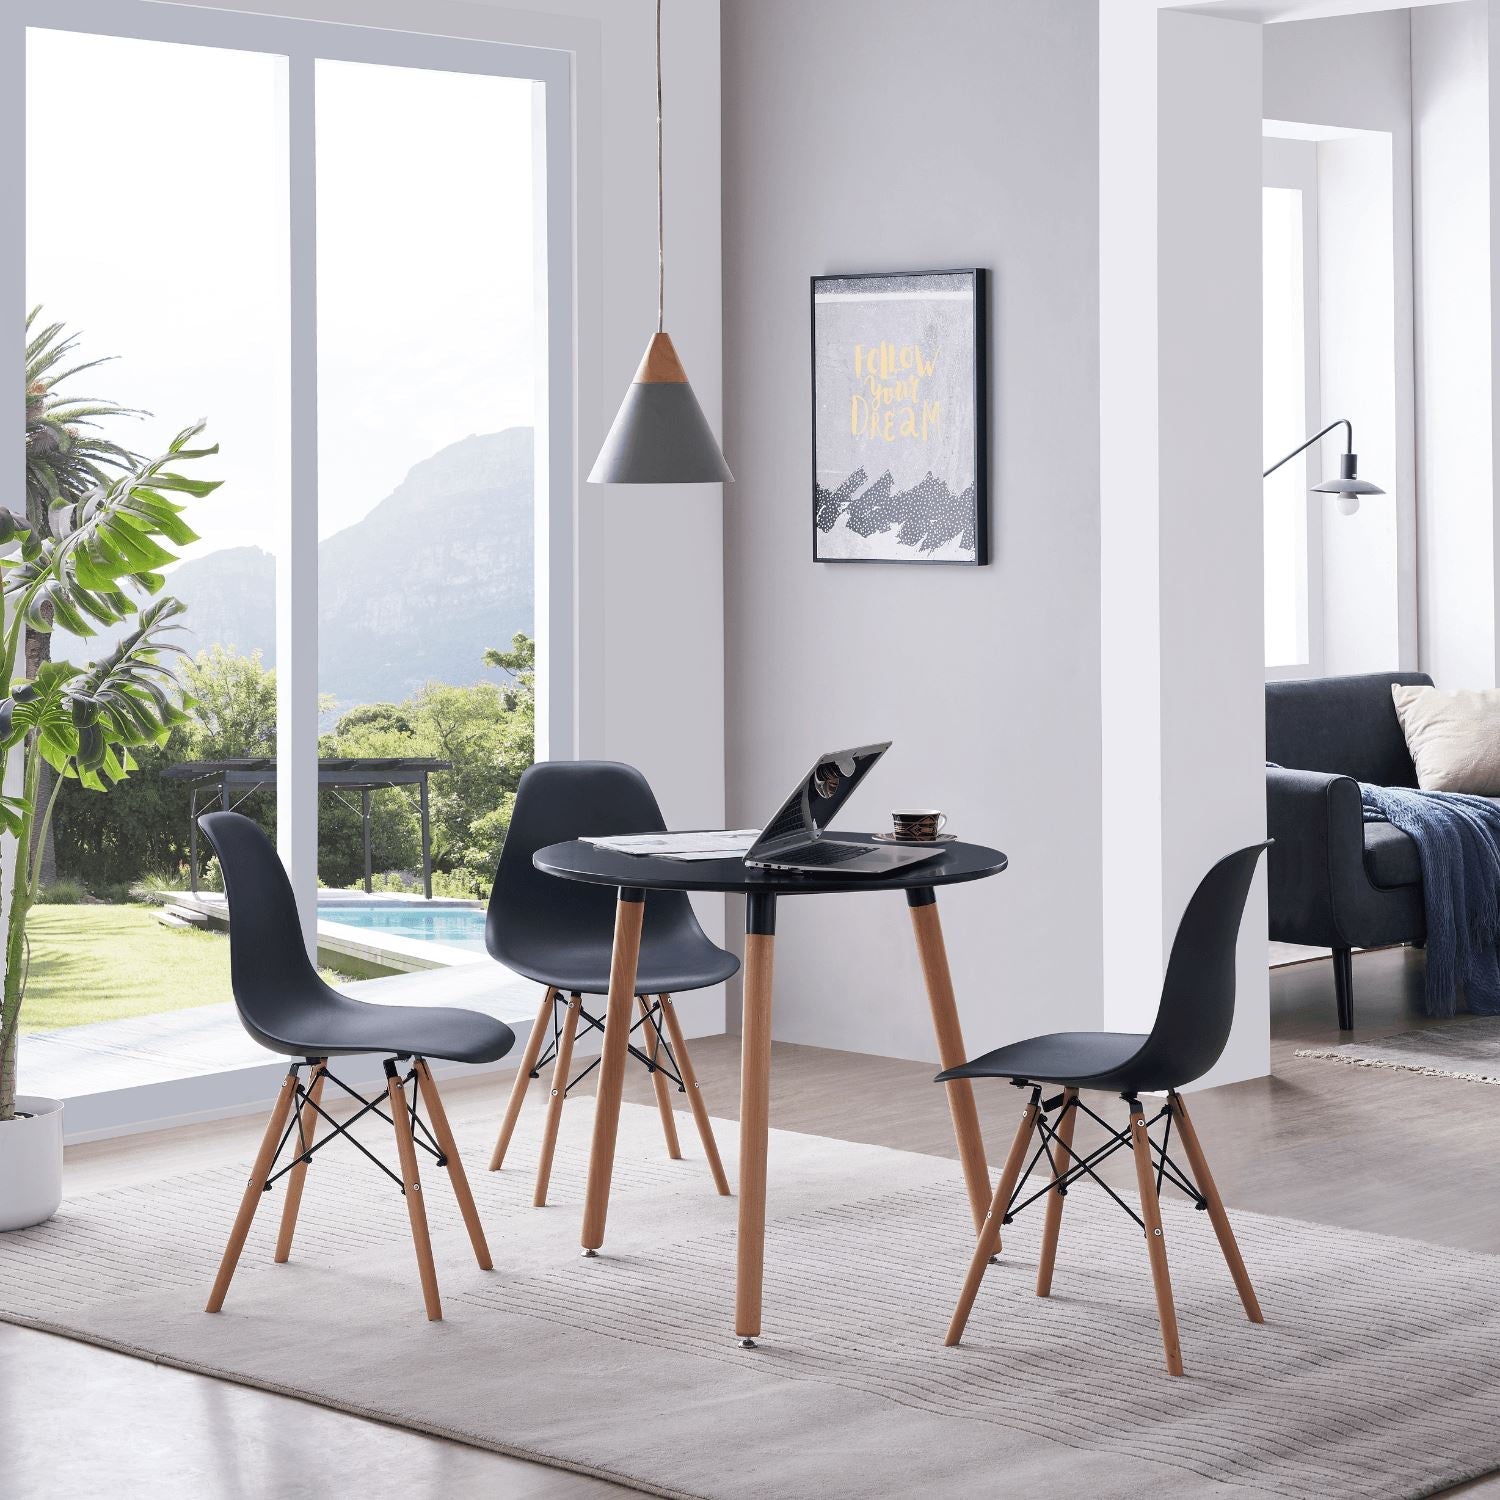 Valmes Chair - 4 | Set Valyou of Furniture